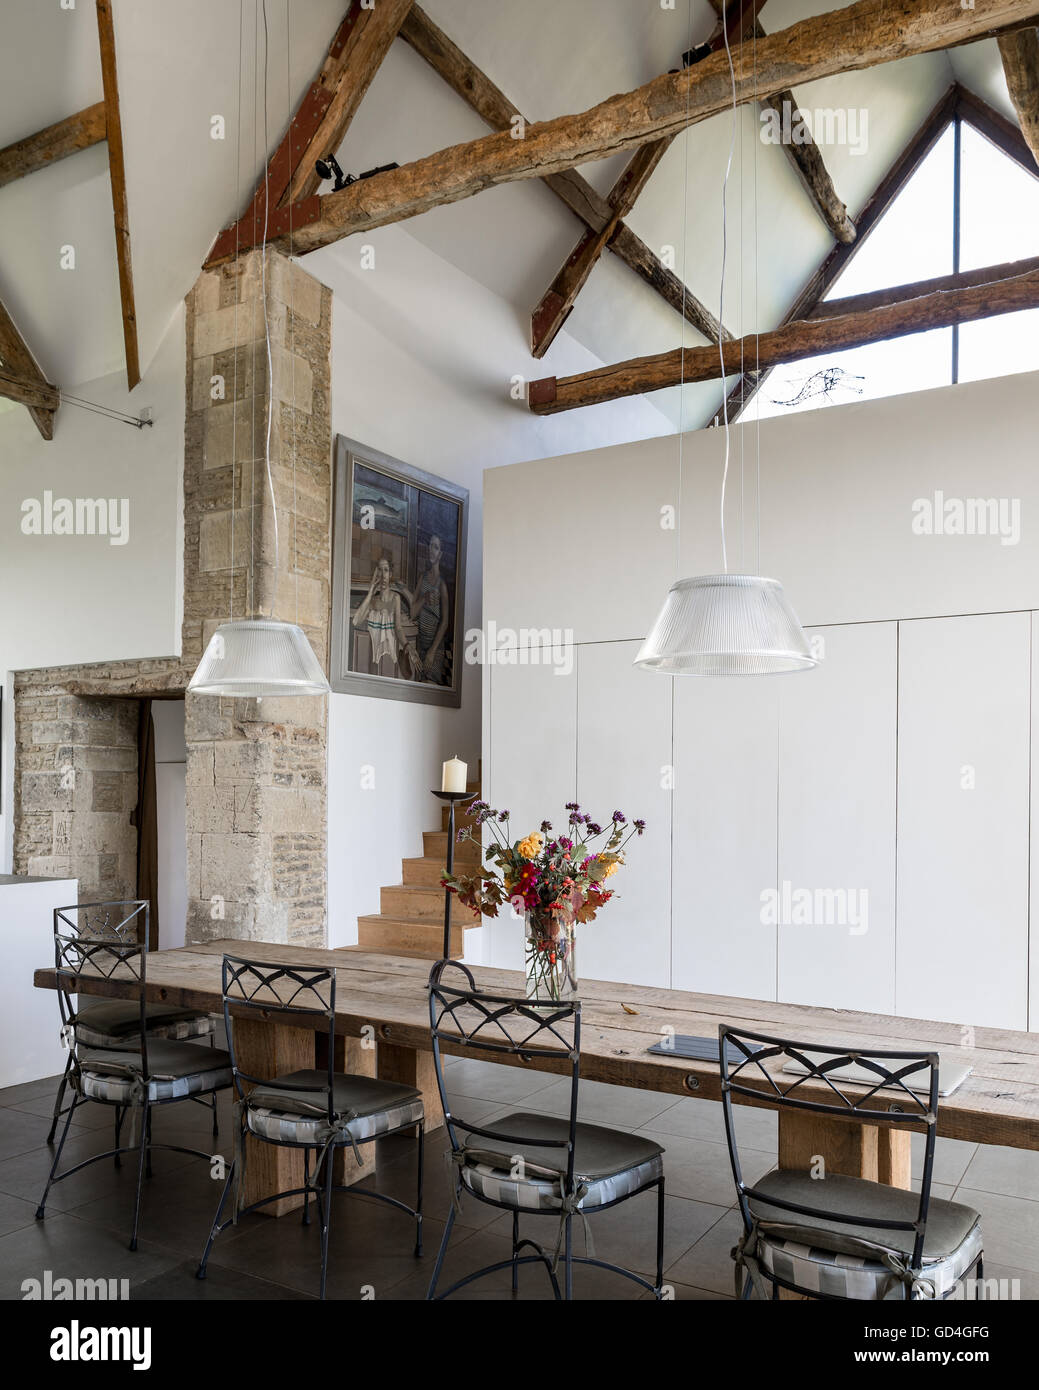 Timber-framed beamed ceiling above refectory style table in double-height barn conversion Stock Photo